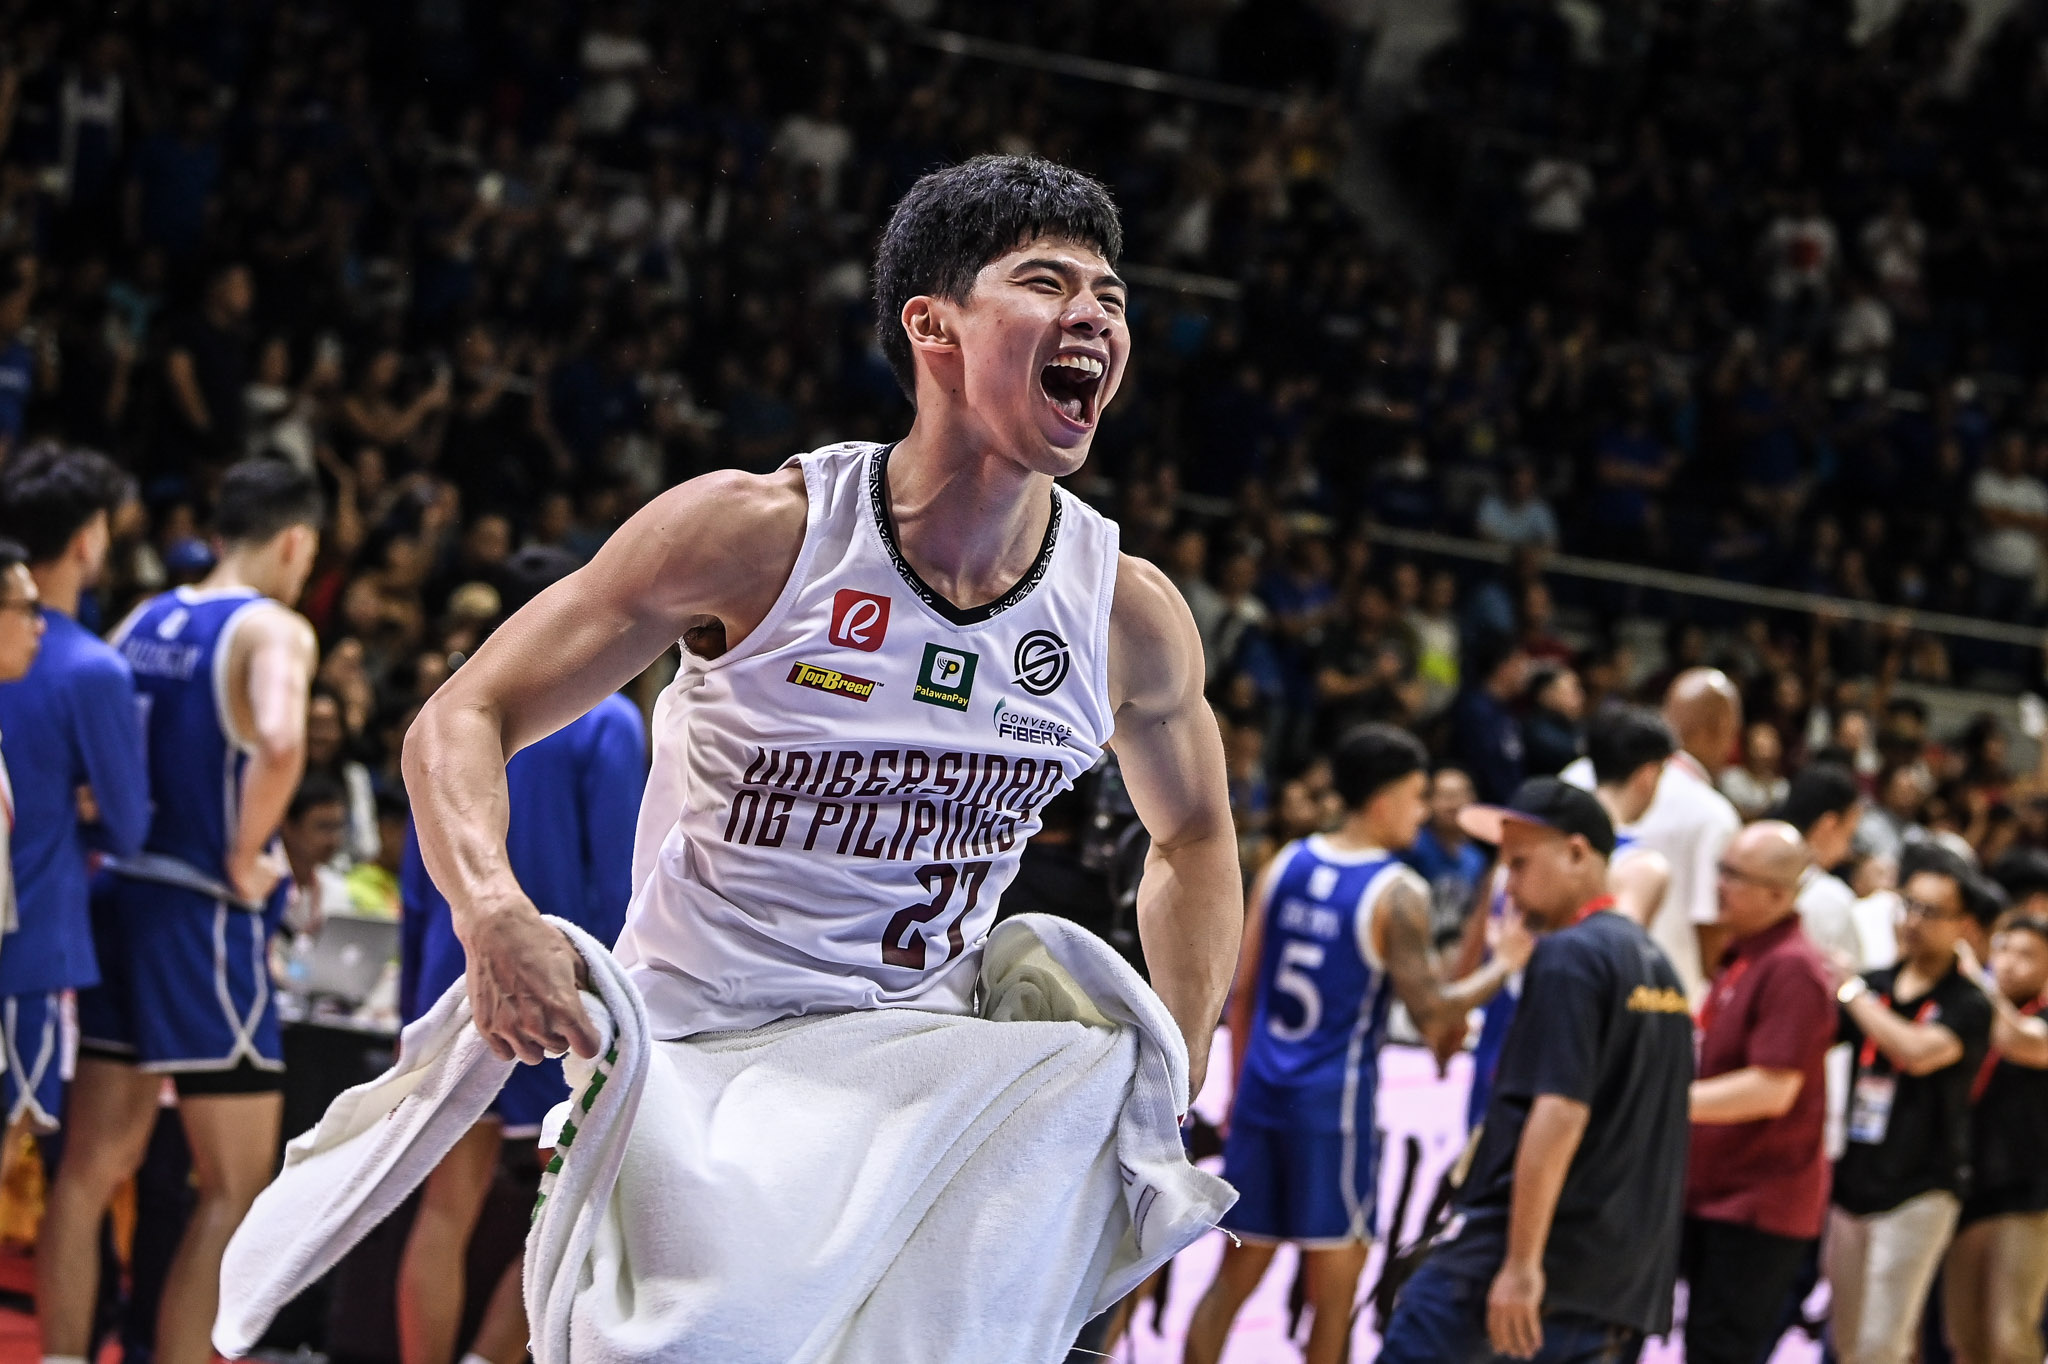 UAAP86-MBB-CJ-Cansino-1410 CJ Cansino reflects on UST's unfulfilled championship dream after 'Sorsogon Bubble' Basketball News UAAP UP UST  - philippine sports news